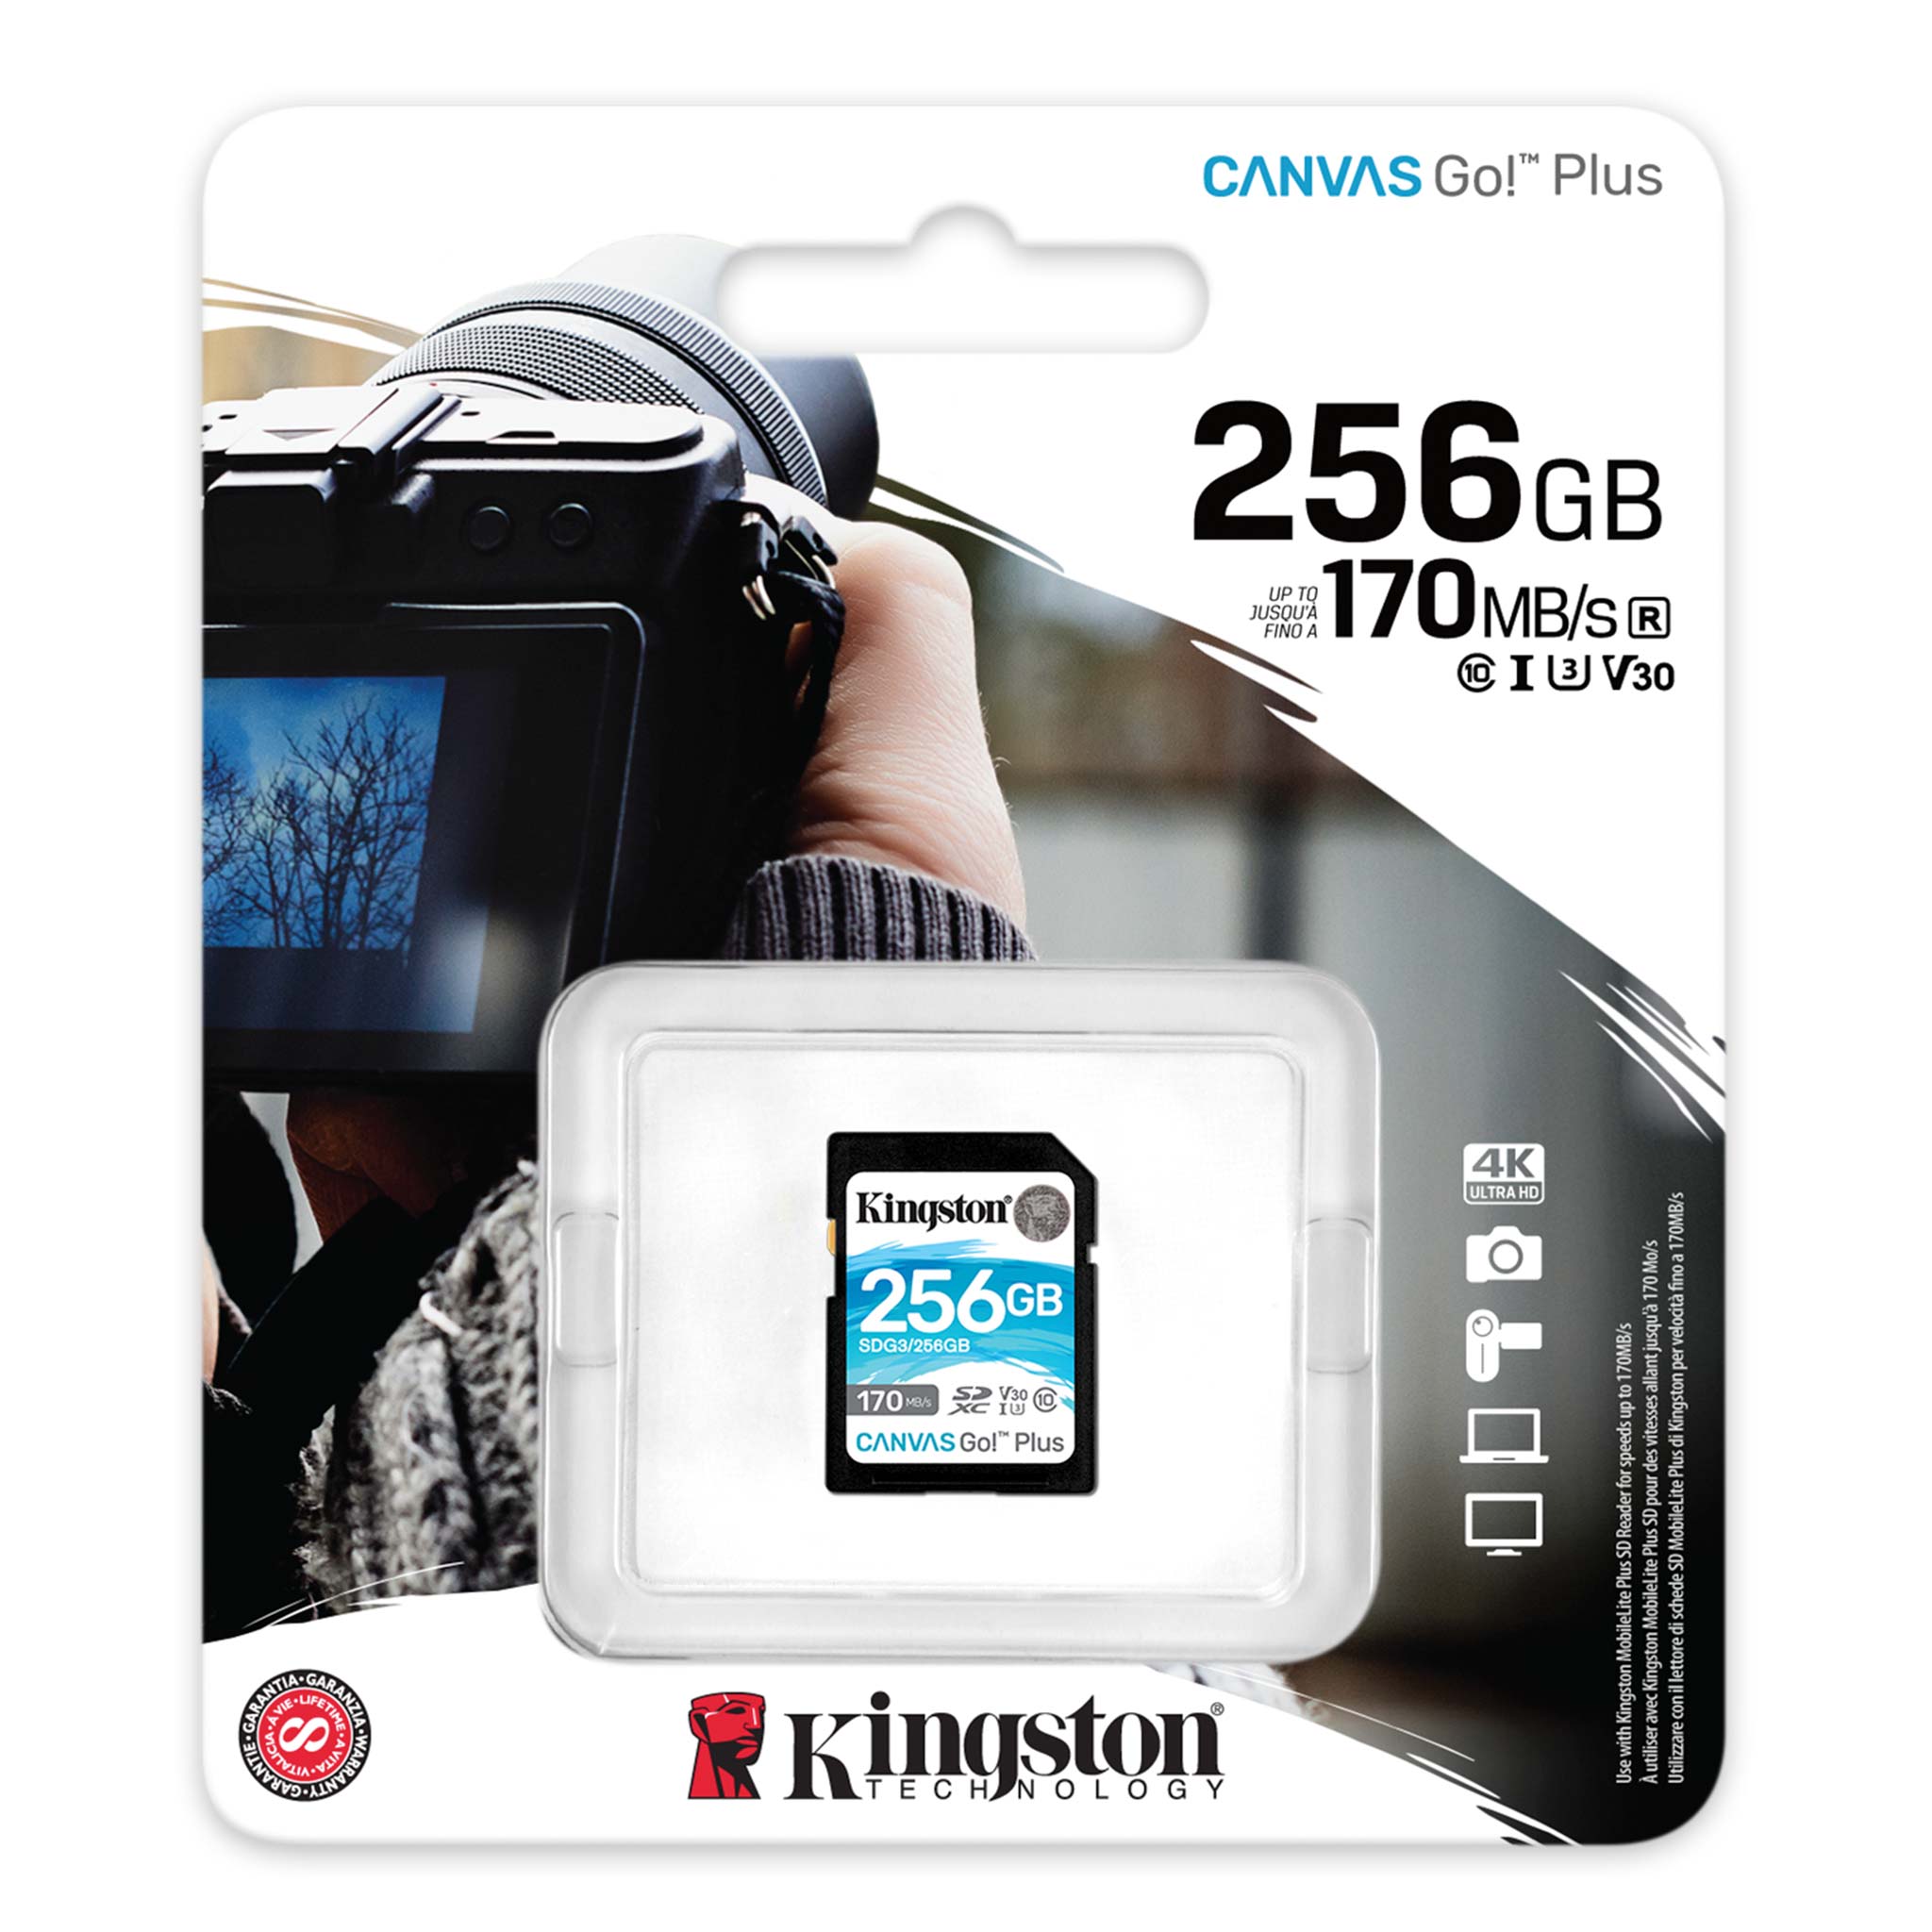 100MBs Works with Kingston Kingston 64GB Videocon V1580 MicroSDXC Canvas Select Plus Card Verified by SanFlash. 